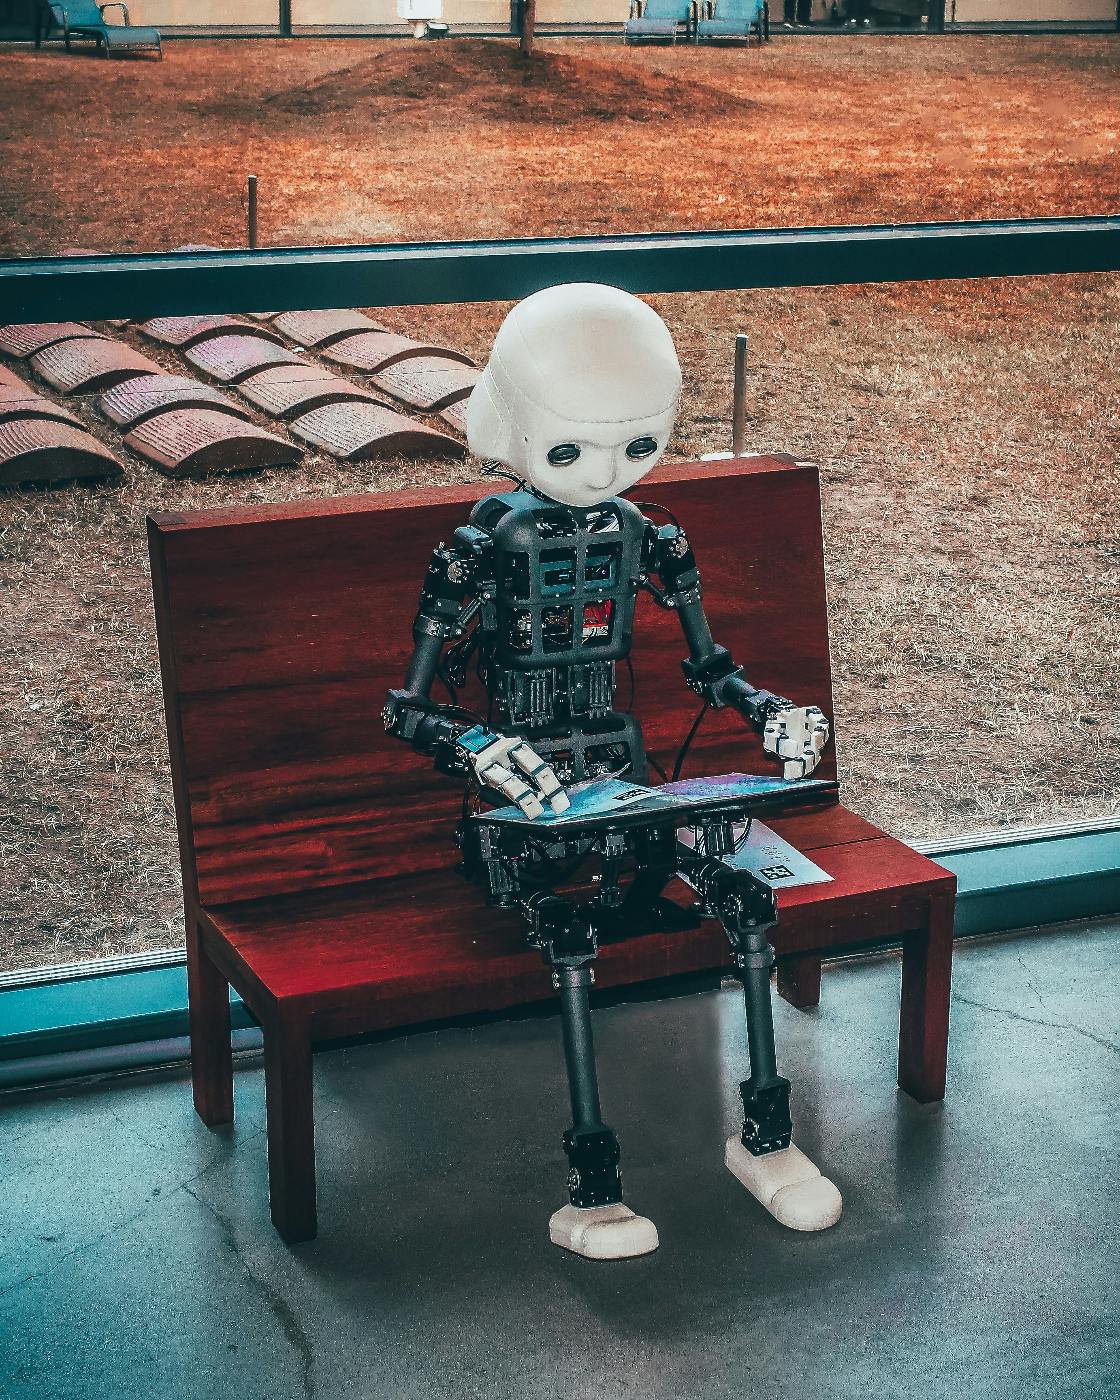 A little boy robot sitting on a bench playing a game